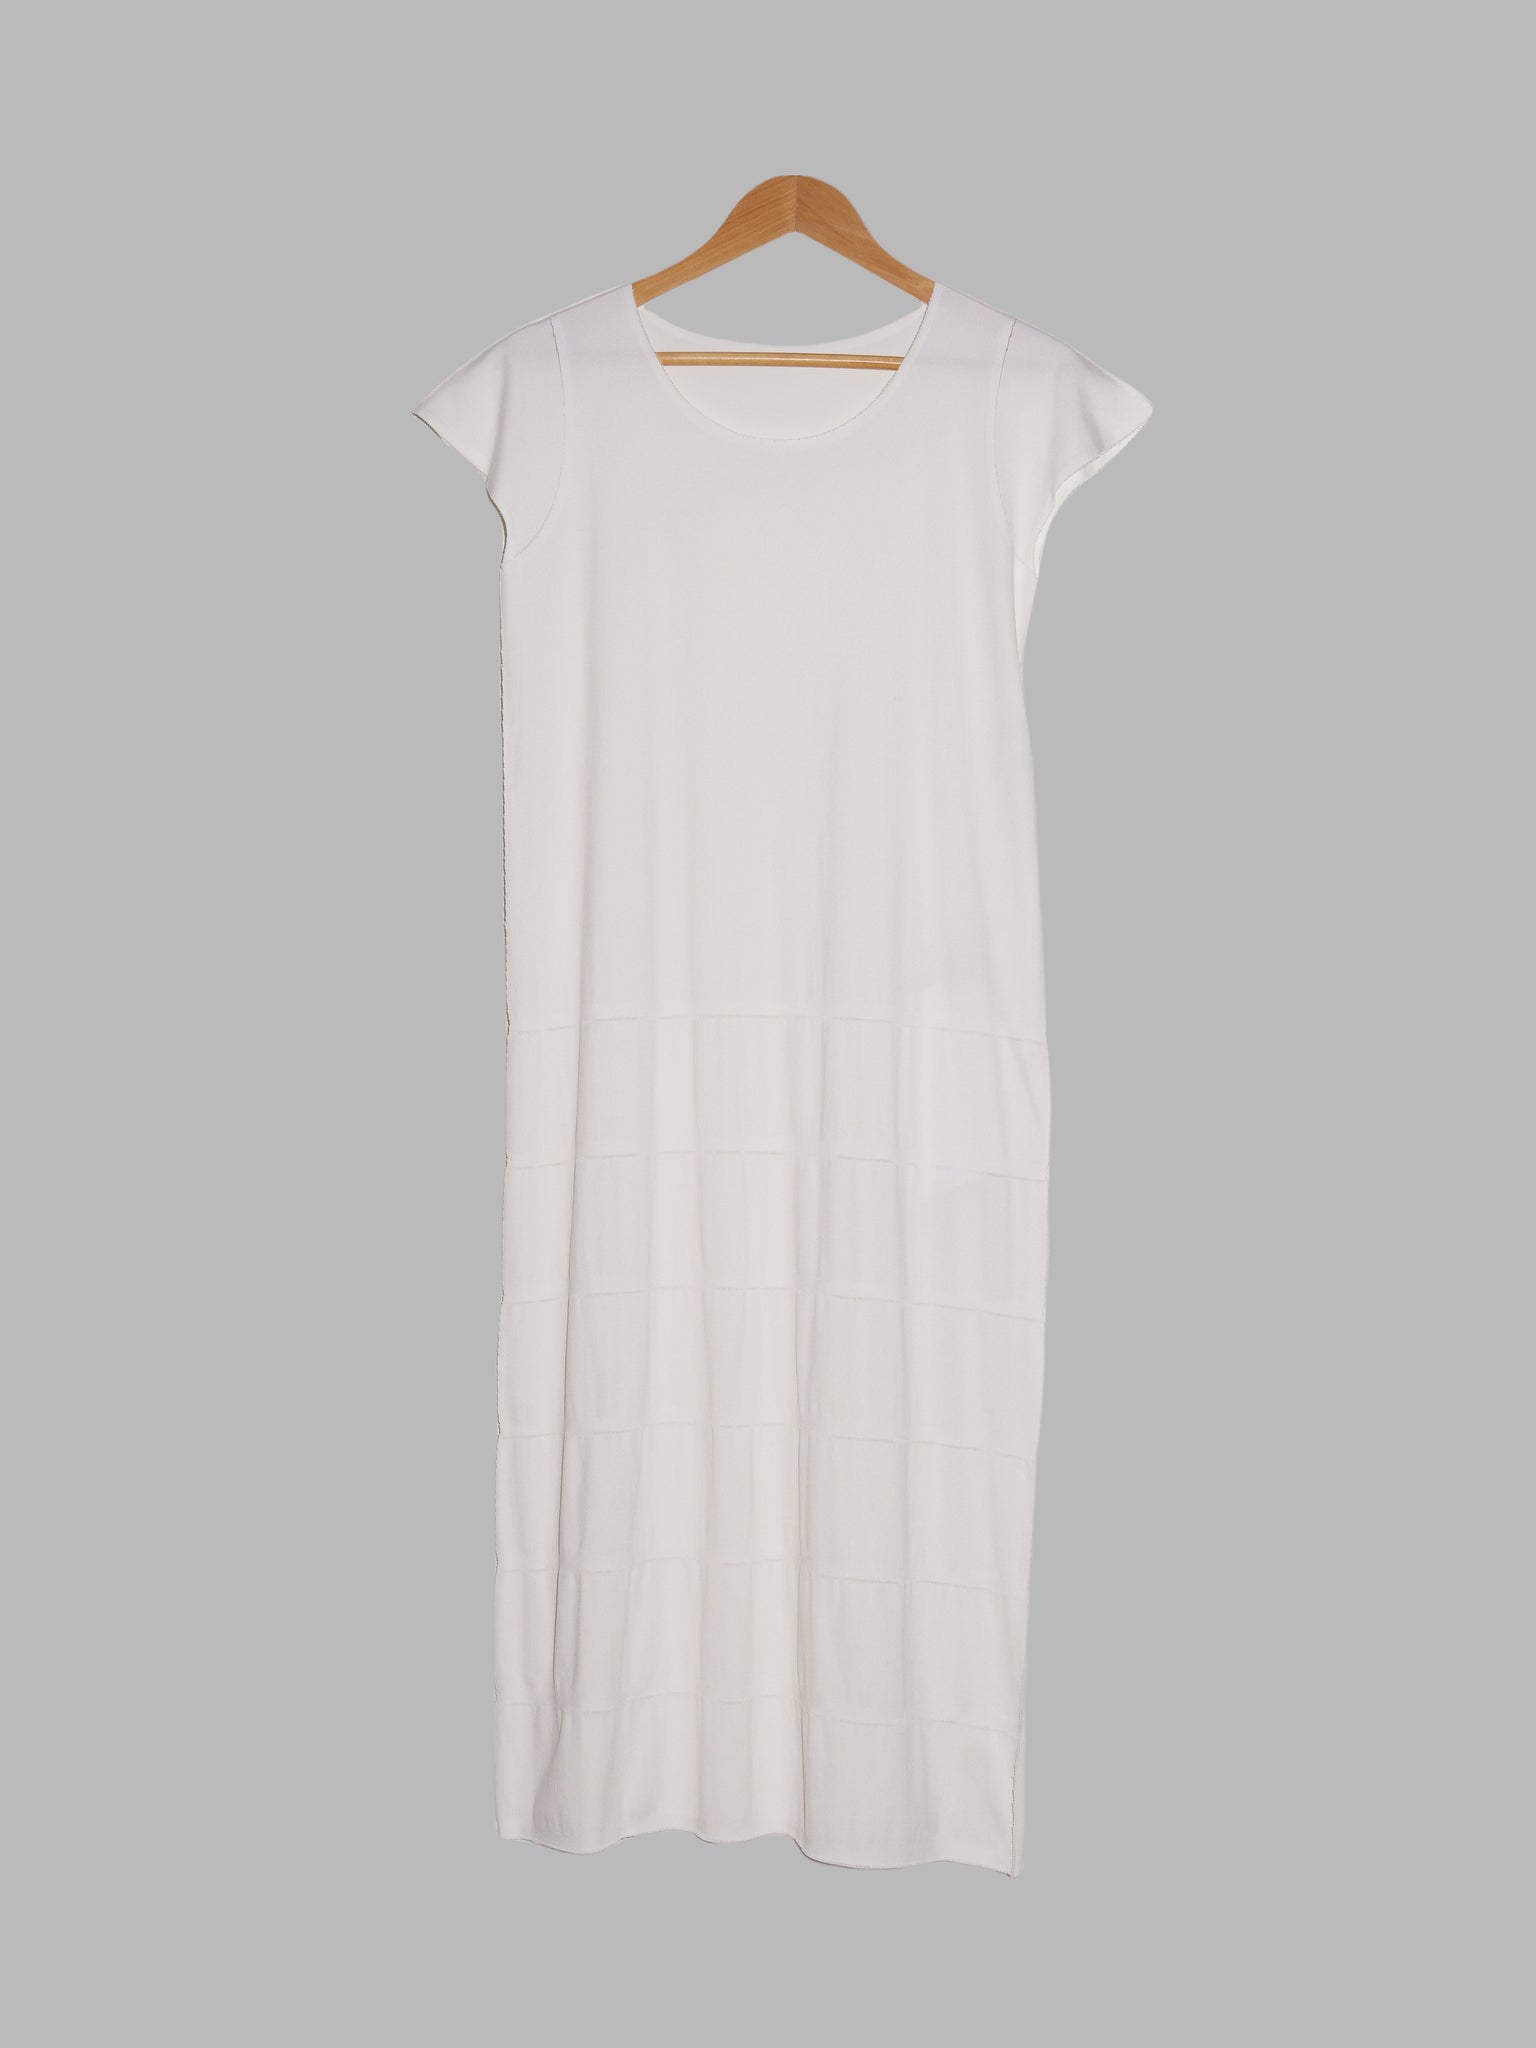 Issey Miyake A-POC Pleats Please off white short sleeve dress with cut lines